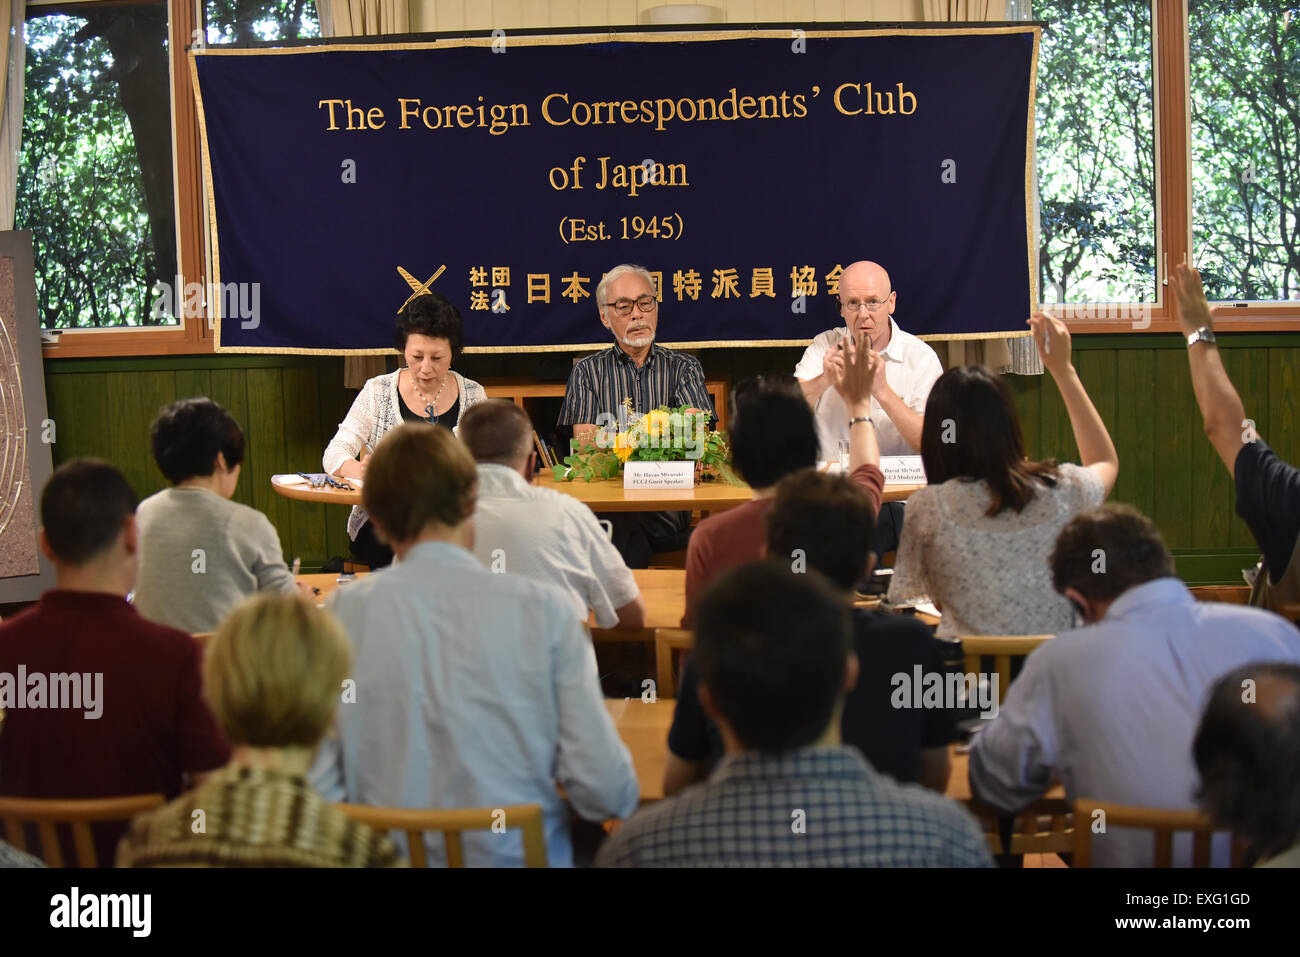 Tokyo, Japan. 13th July, 2015. Japan's Oscar-awarded animator Hayao Miyazaki (C, rear) attends a press conference at the Foreign Correspondents' Club of Japan in Tokyo, Japan, on July 13, 2015. Hayao Miyazaki Monday urged the Japanese government to follow the country 's 70-year pacifism since the end of World War II by dropping a plan to build a replacement within Okinawa for a controversial U.S. airbase and a security-related legislation package to allow Japan' s defense forces to exercising the right to collective defense. © Foreign Correspondents' Club of Japan/Xinhua/Alamy Live News Stock Photo